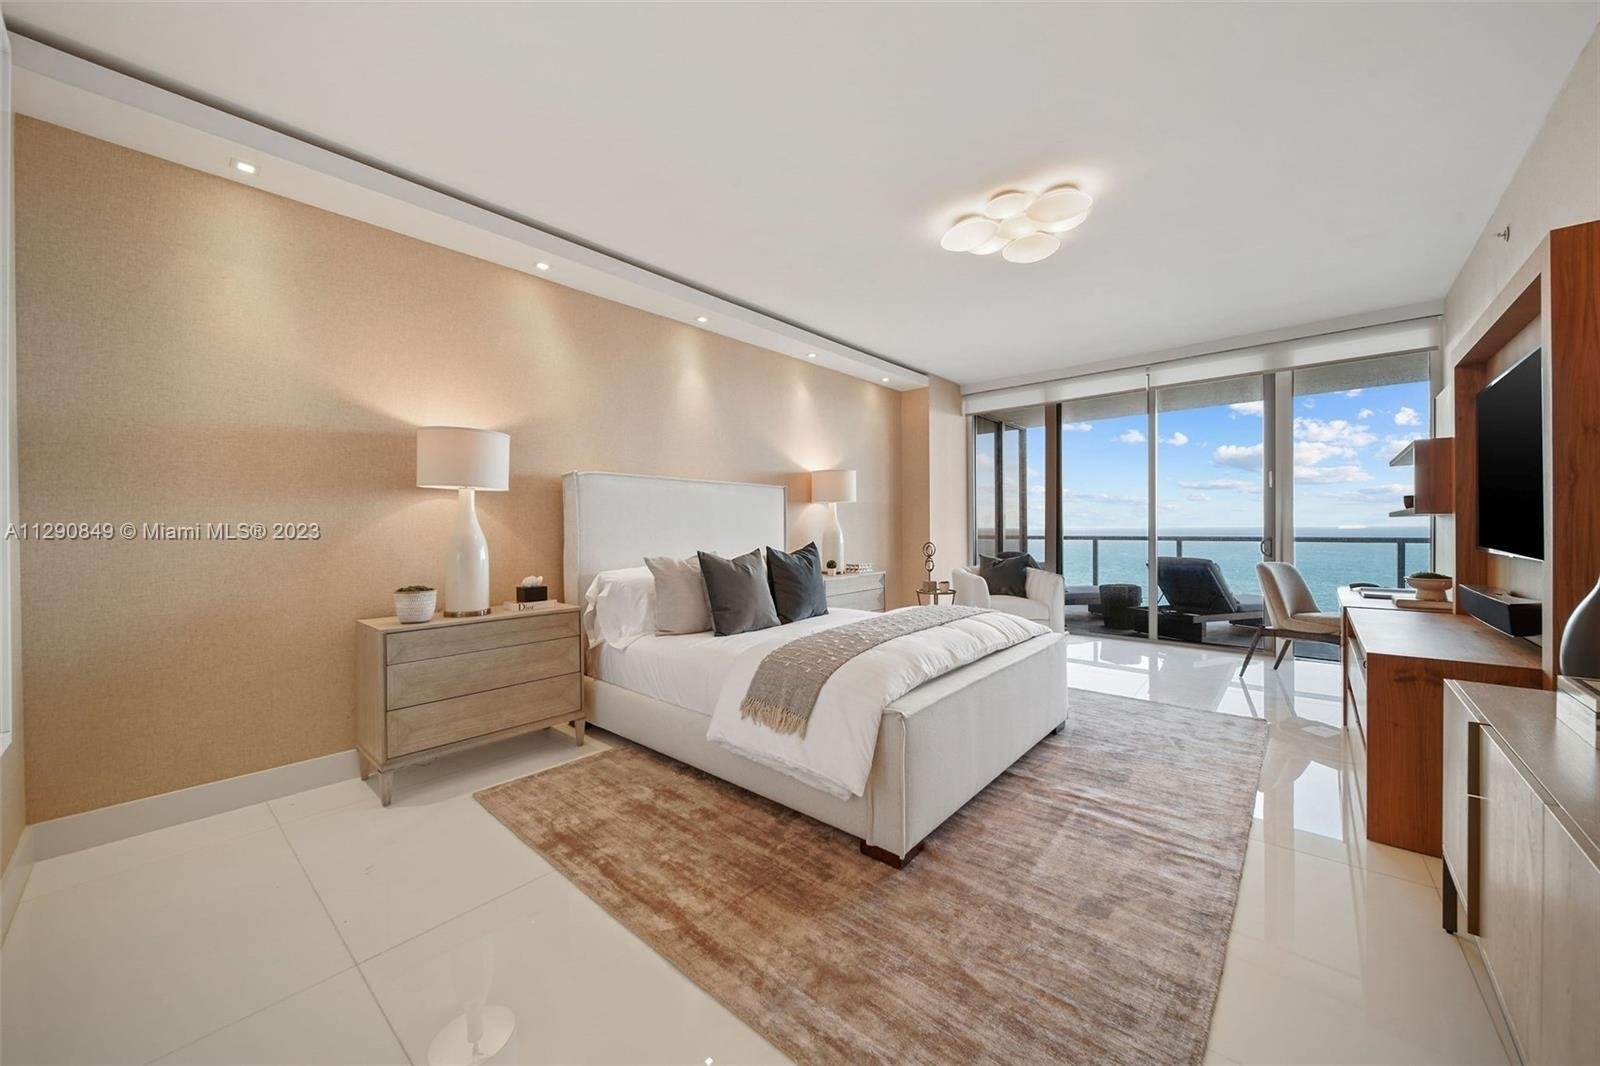 18. Condominiums for Sale at 9701 Collins Ave , 2302S Bal Harbour, FL 33154